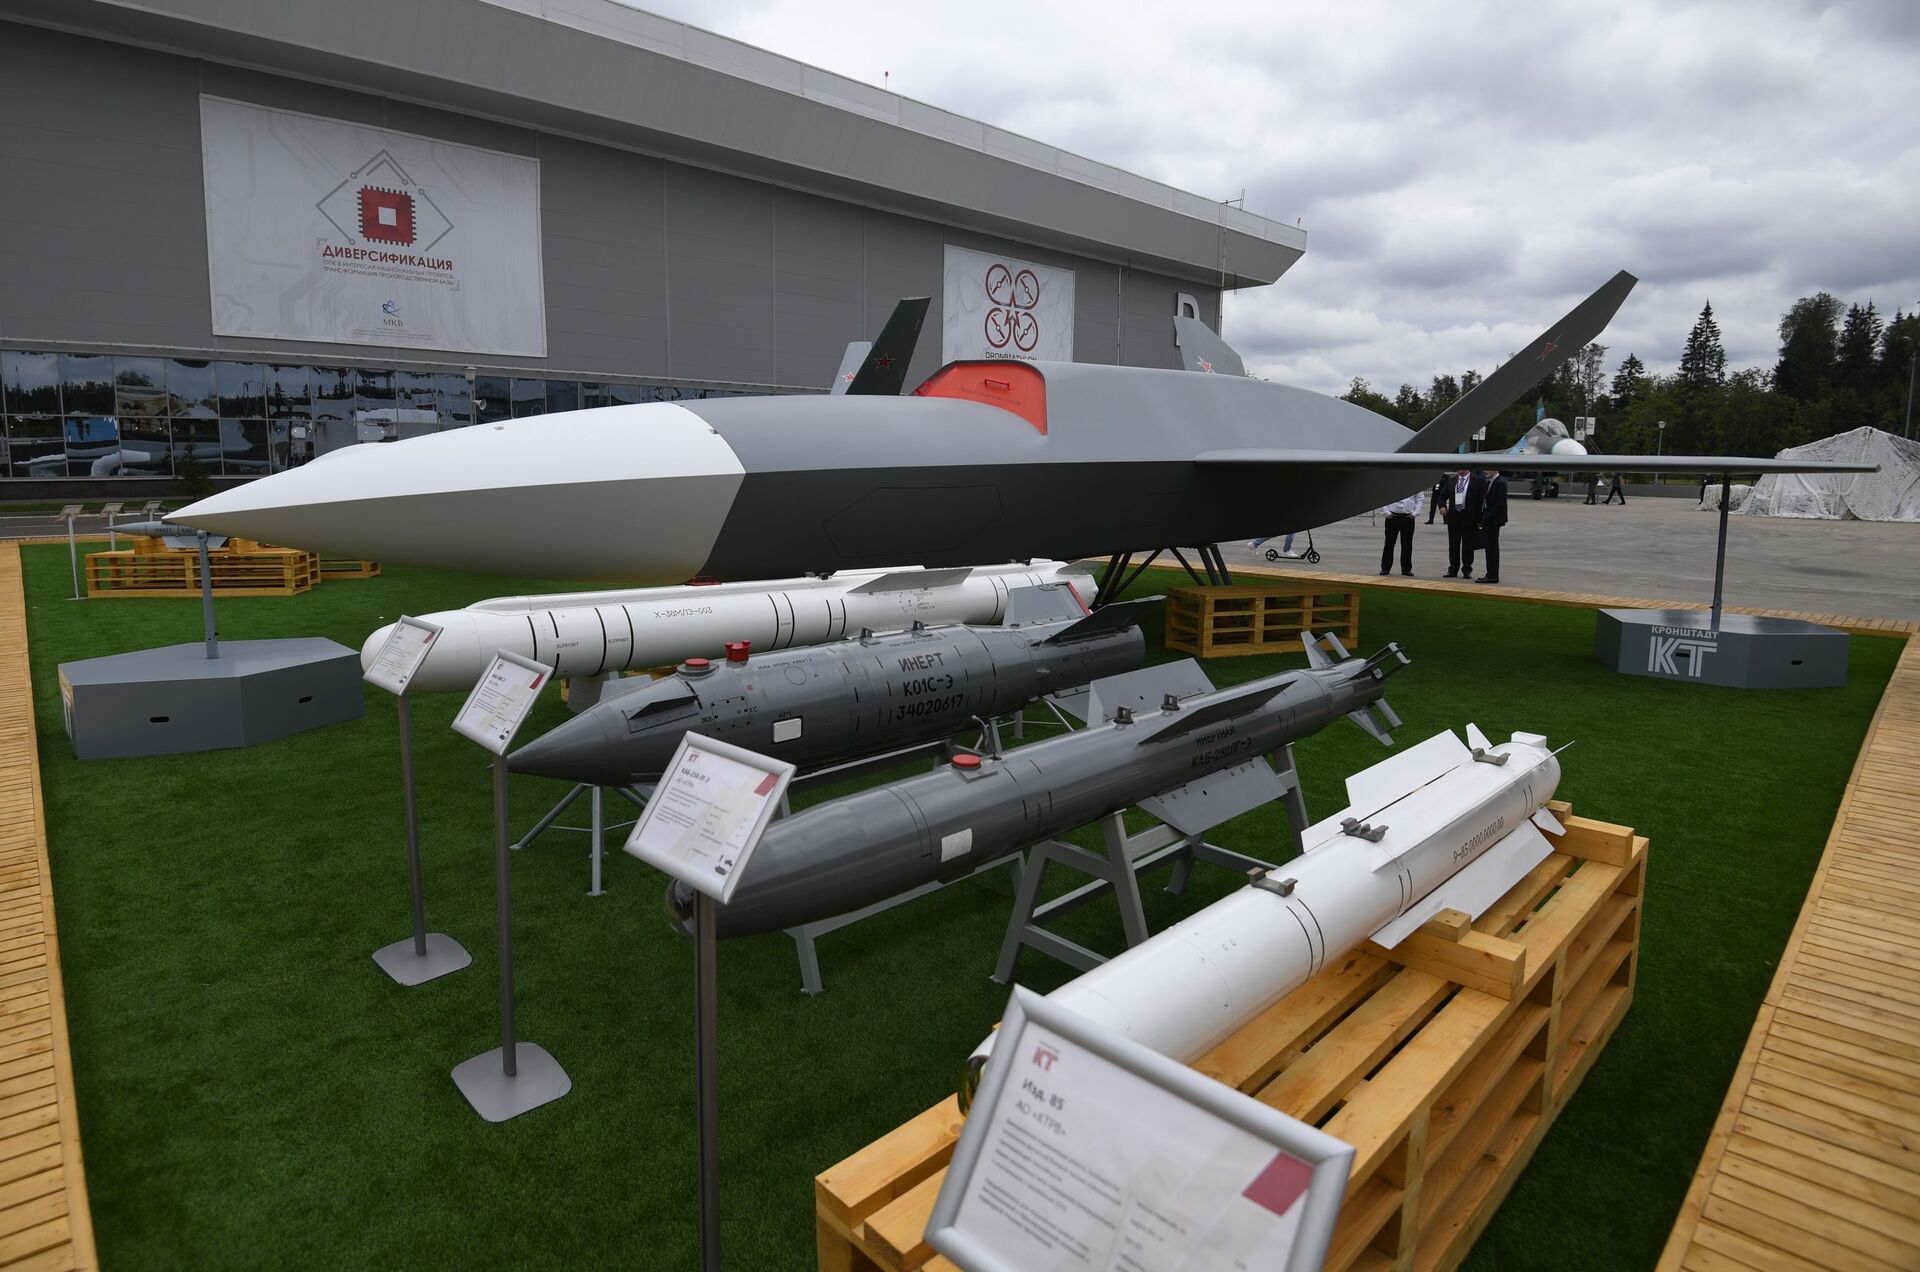 Unmanned aerial vehicle 'Grom' (Thunder) at the Army-2020 show in Moscow on 24 August 2020 - Sputnik International, 1920, 07.09.2021